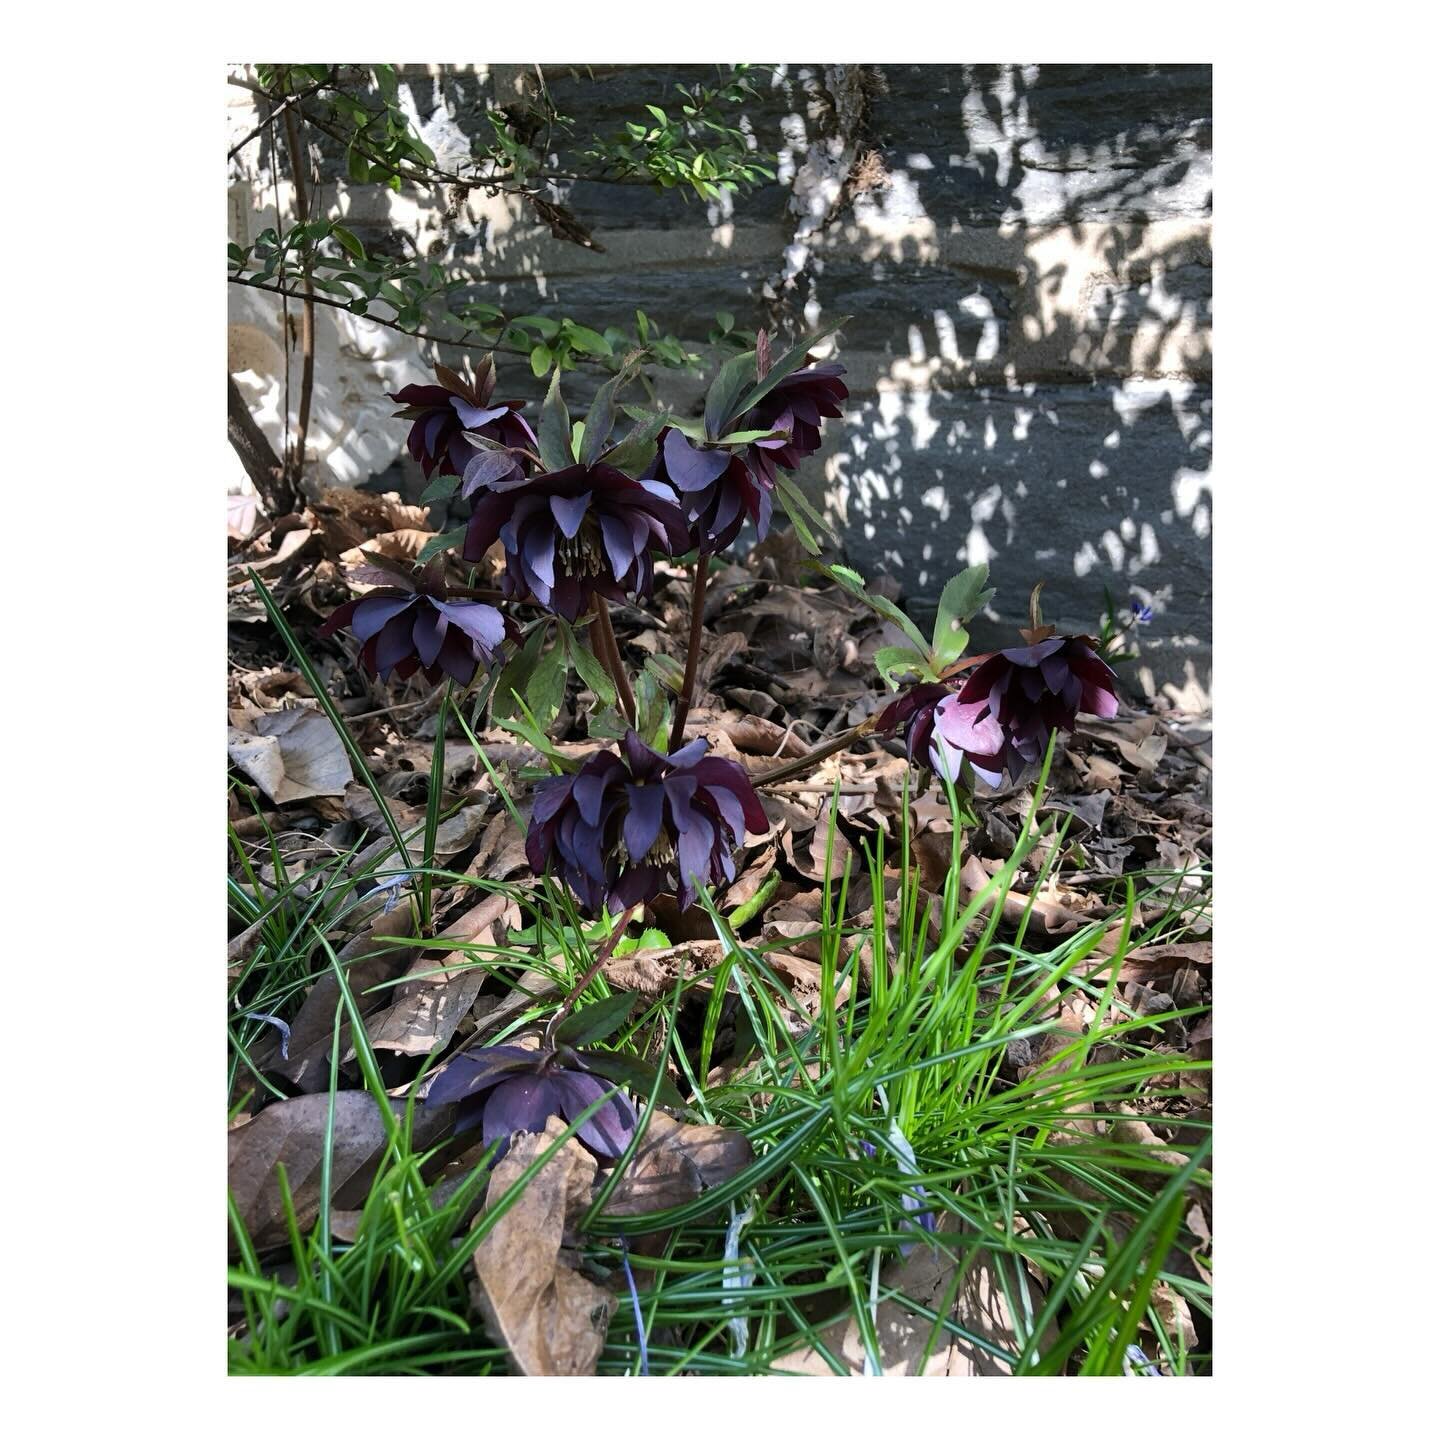 We plant mostly native species to maximize ecological impact and a sense of place, but Hellebores are indispensable. They&rsquo;re easy, evergreen doers, requiring only one cut-back in Nov/Dec. Amazing variety. Great companions for early spring bulbs